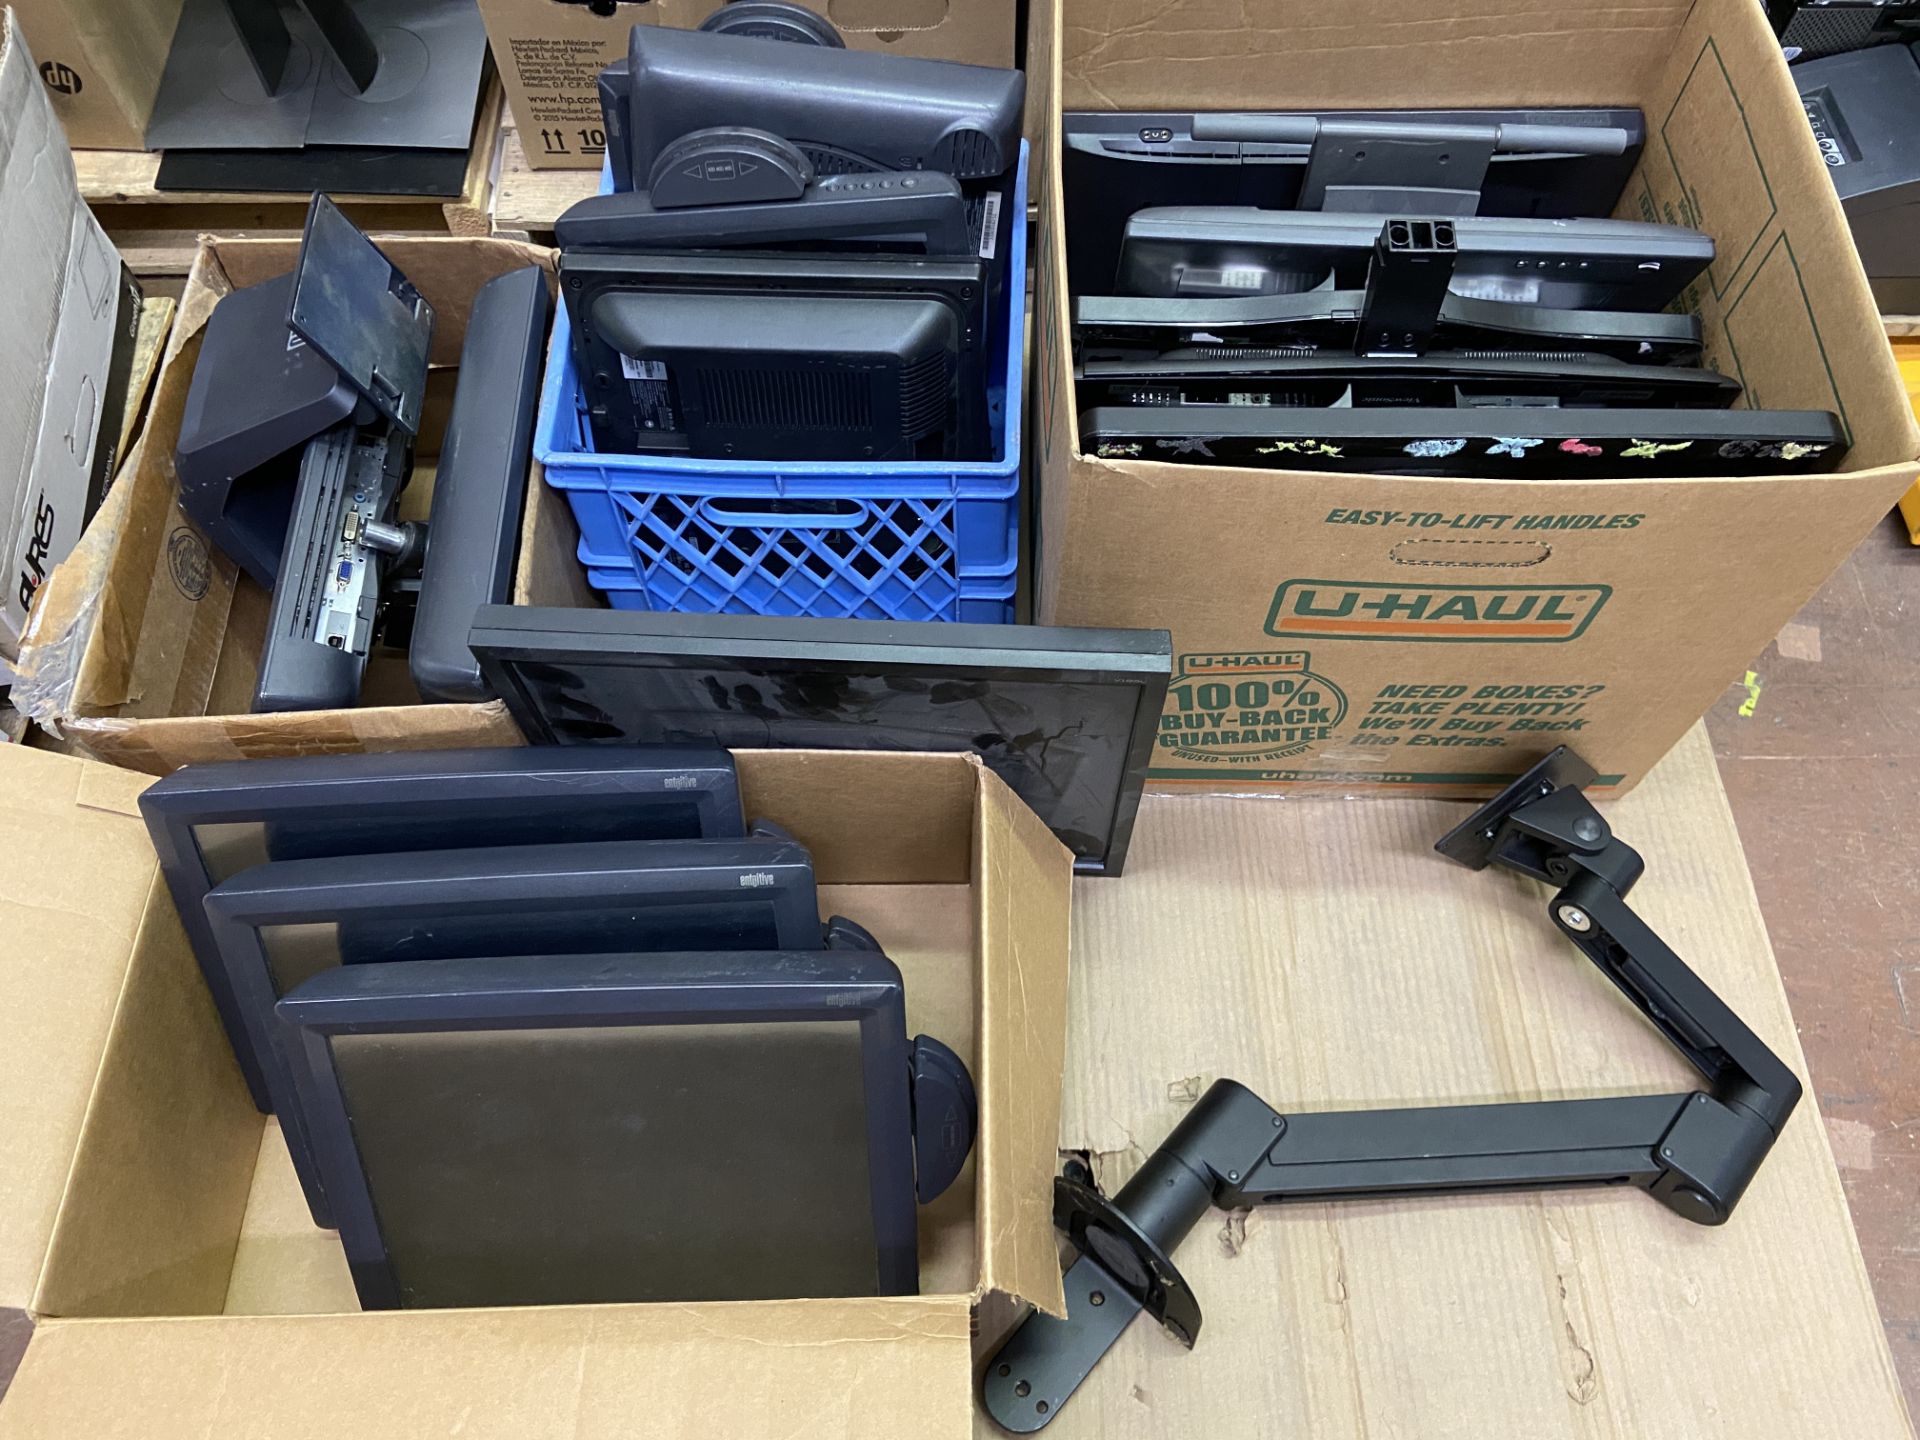 Short Pallet of 17 POS monitors, Standing Monitor Stand Etc